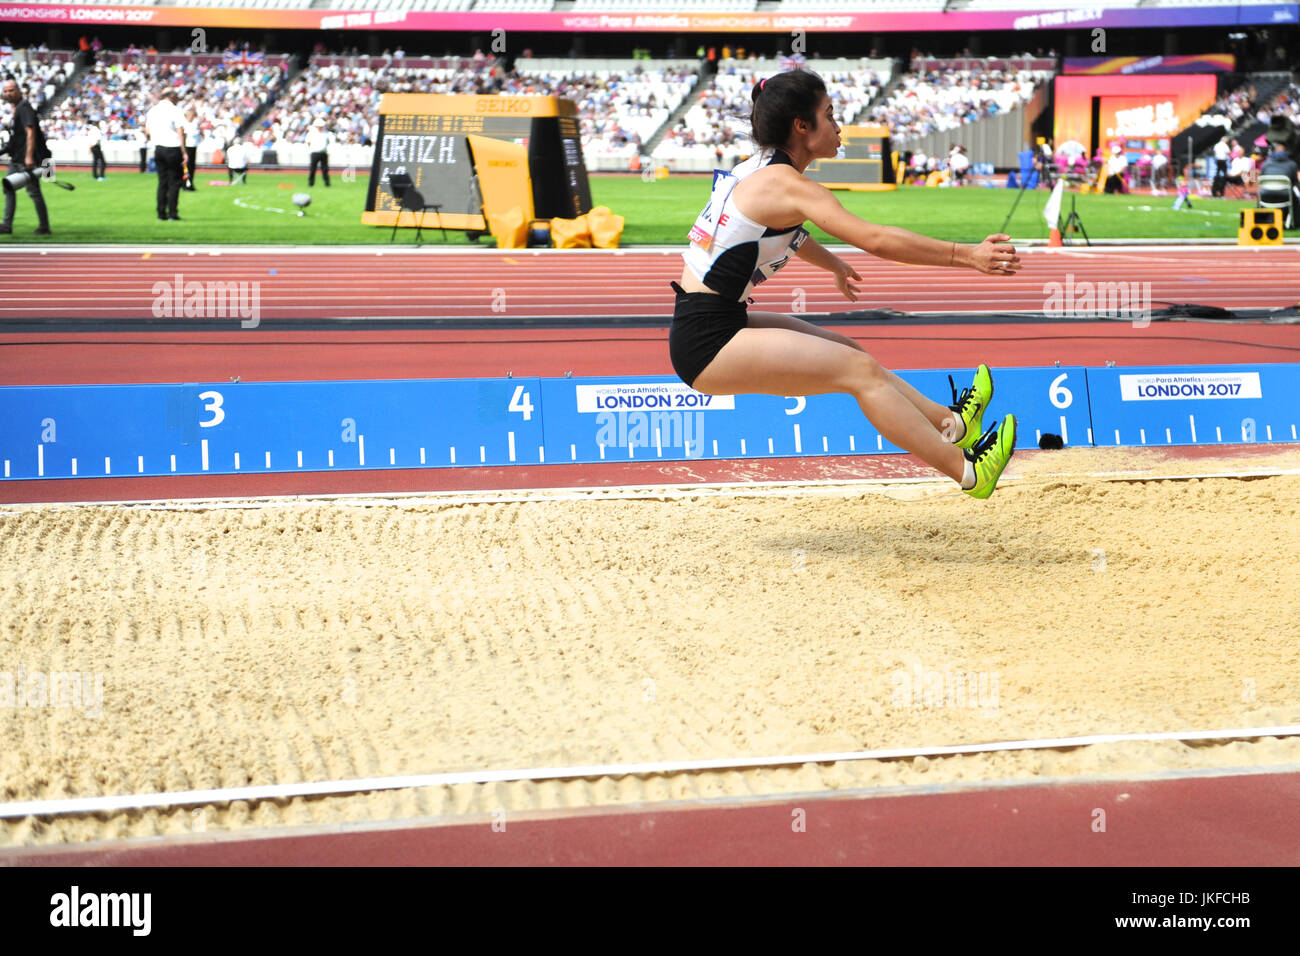 London, UK. 23rd July, 2017. Dilba Tanrikulu (TUR) stretching to land during the Men's Long Jump T11 at the 2017 World Para Athletics Championships in the London Stadium, Queen Elizabeth Olympic Park. Credit: Michael Preston/Alamy Live News Stock Photo